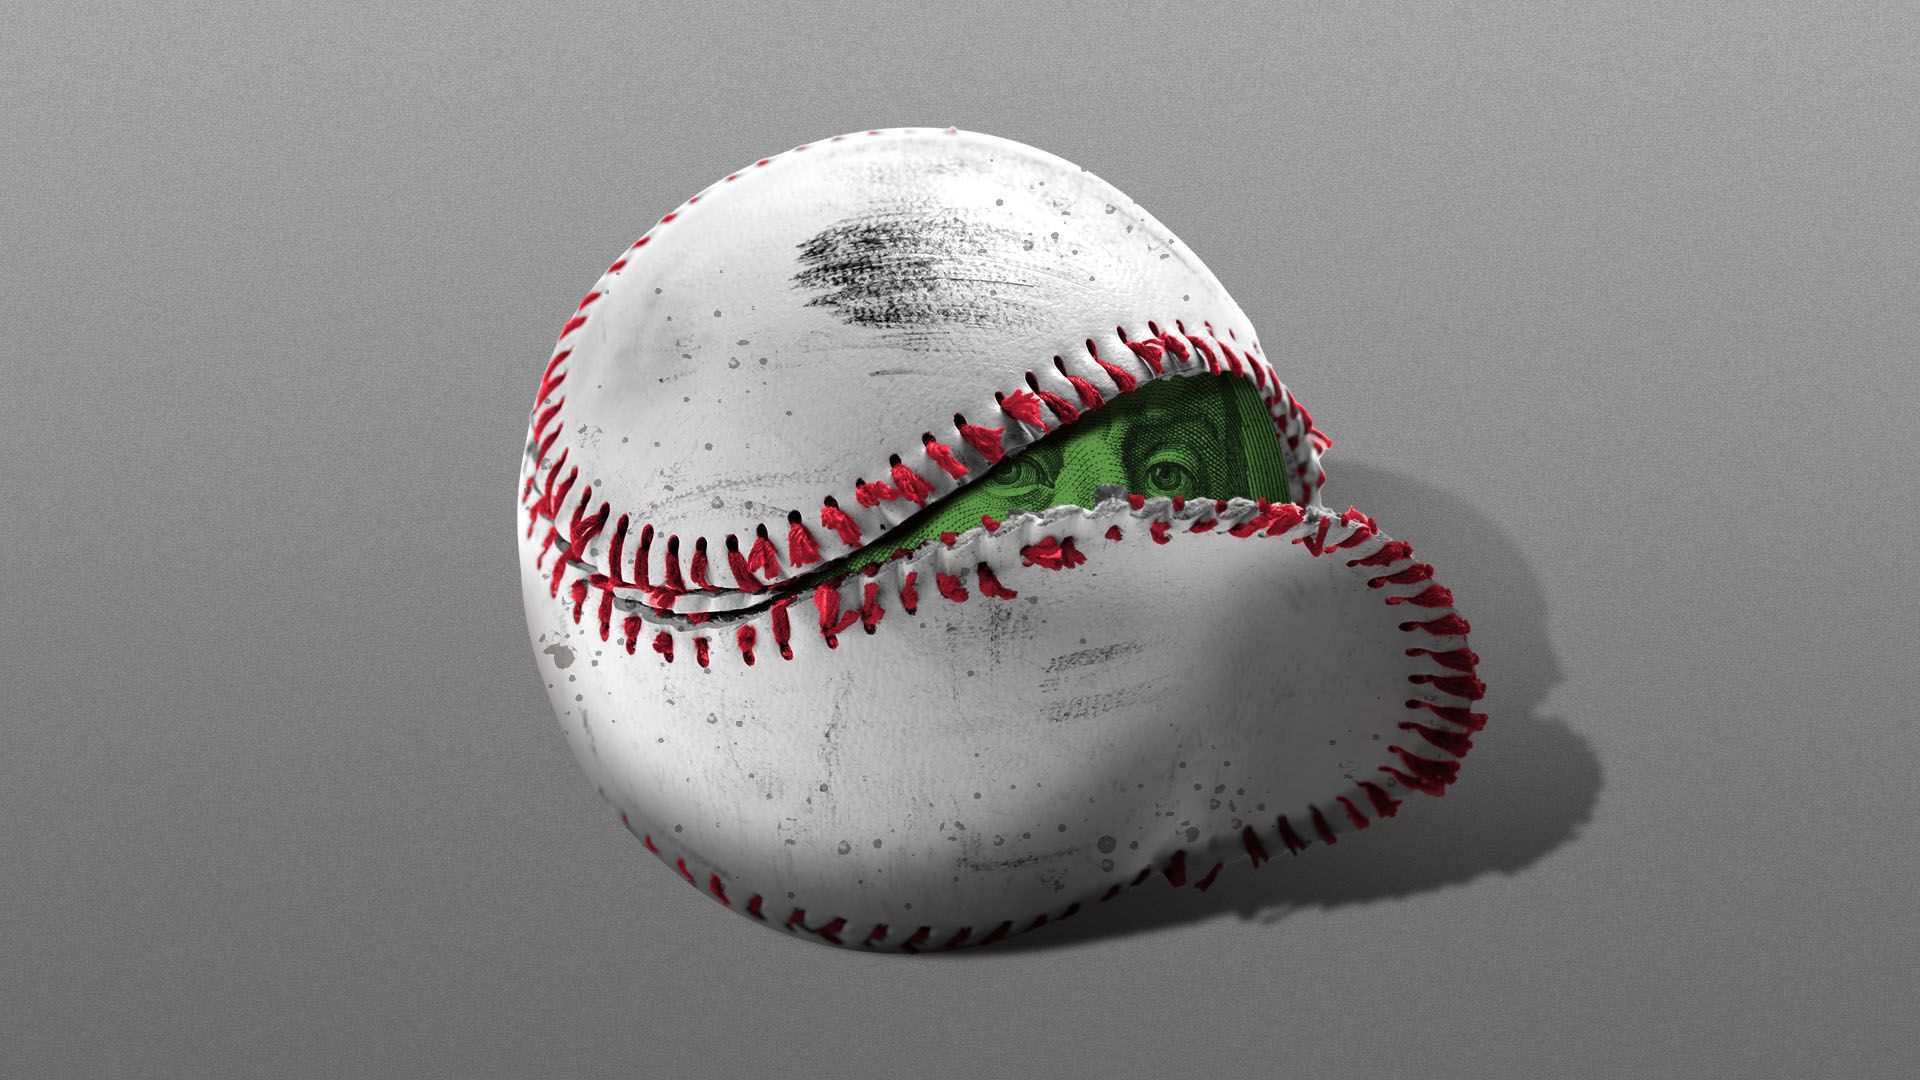 Illustration of a torn baseball with money inside of it.